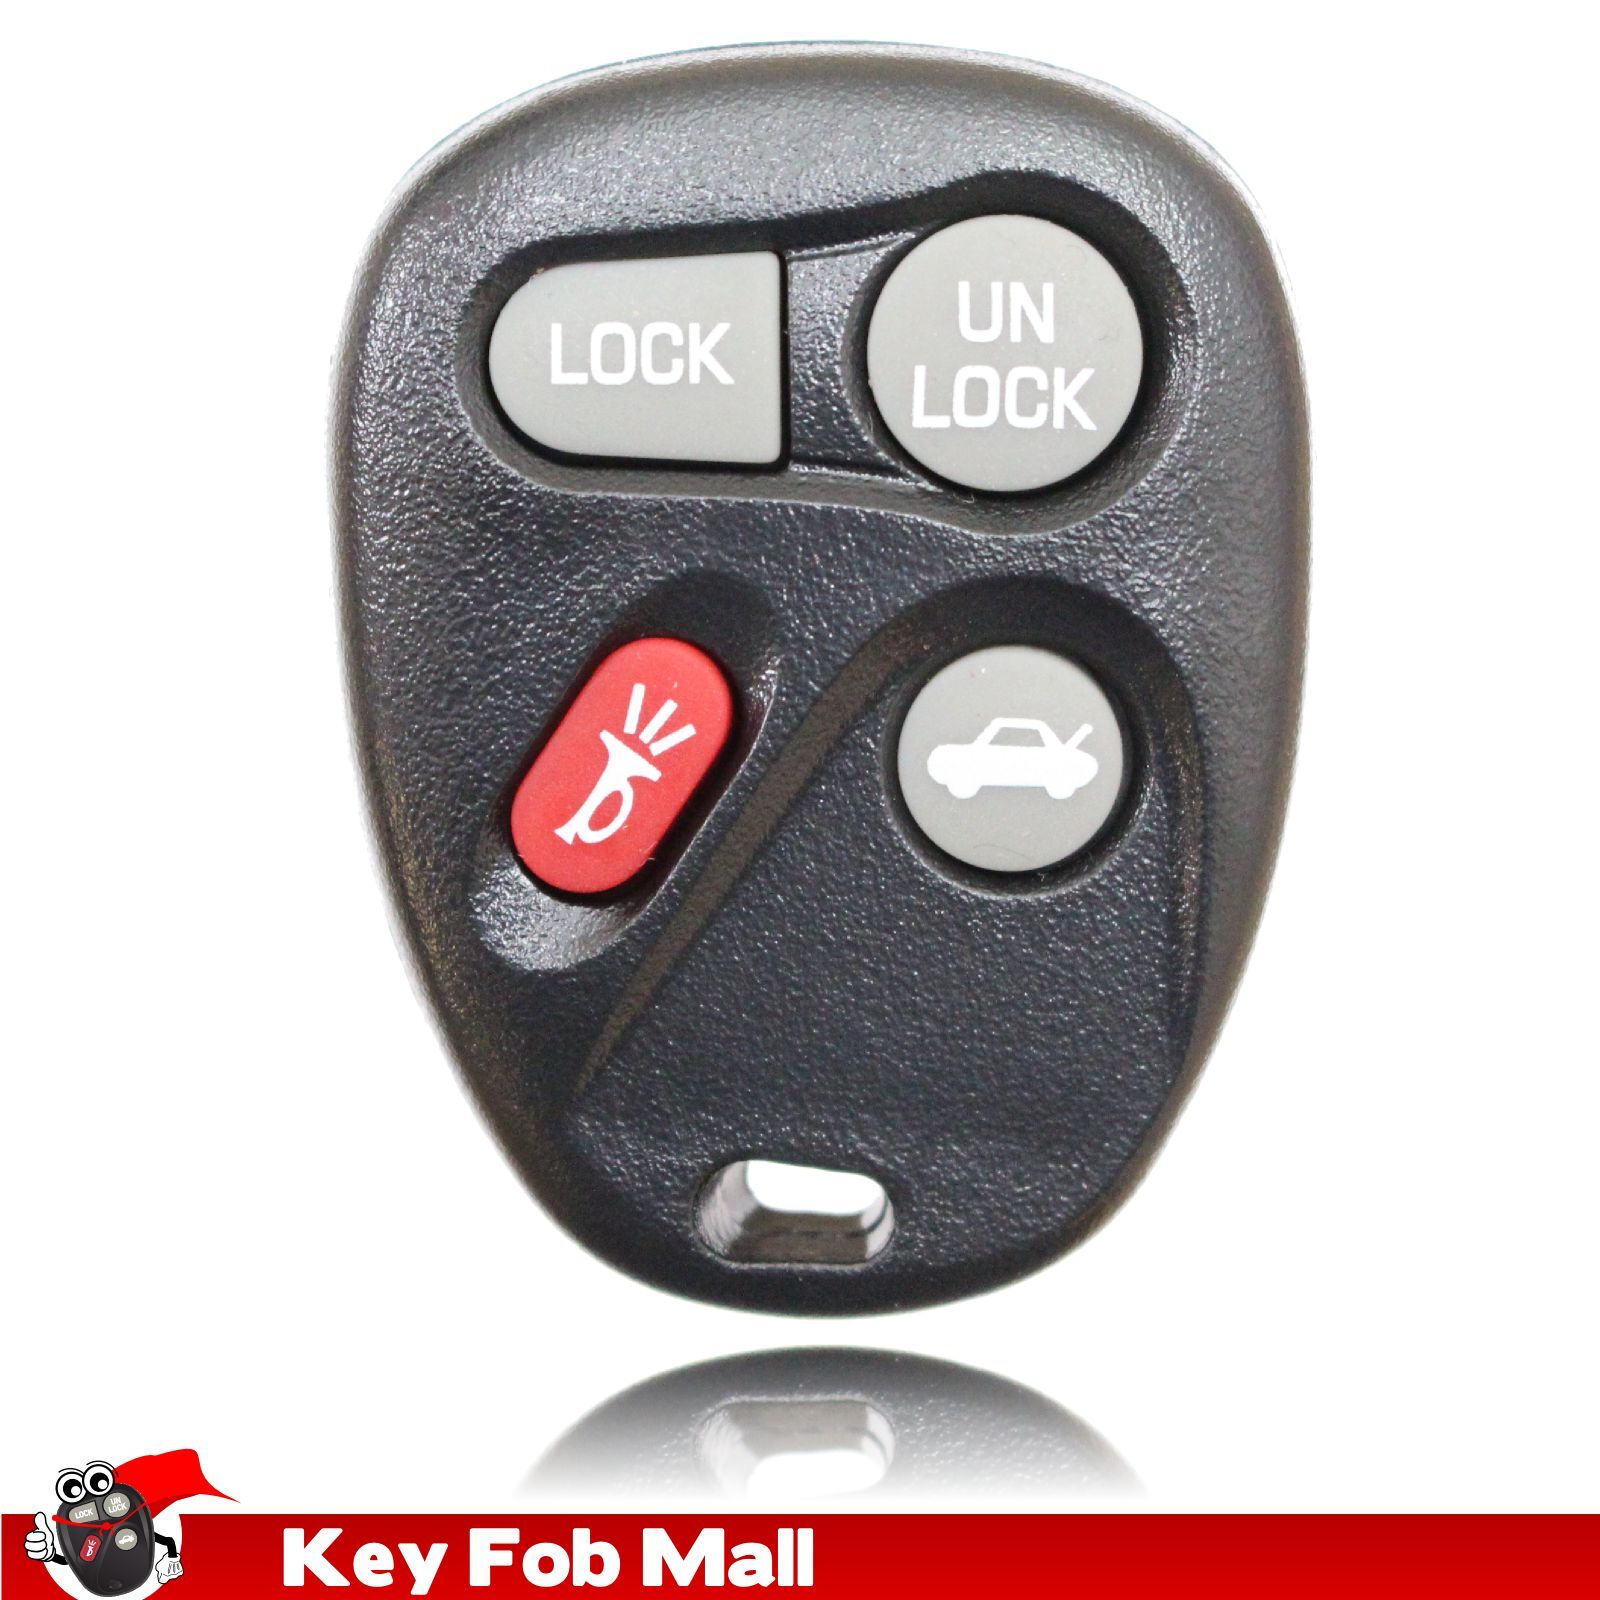 NEW Keyless Entry Key Fob Remote For a 2004 Cadillac SRX 4 Buttons